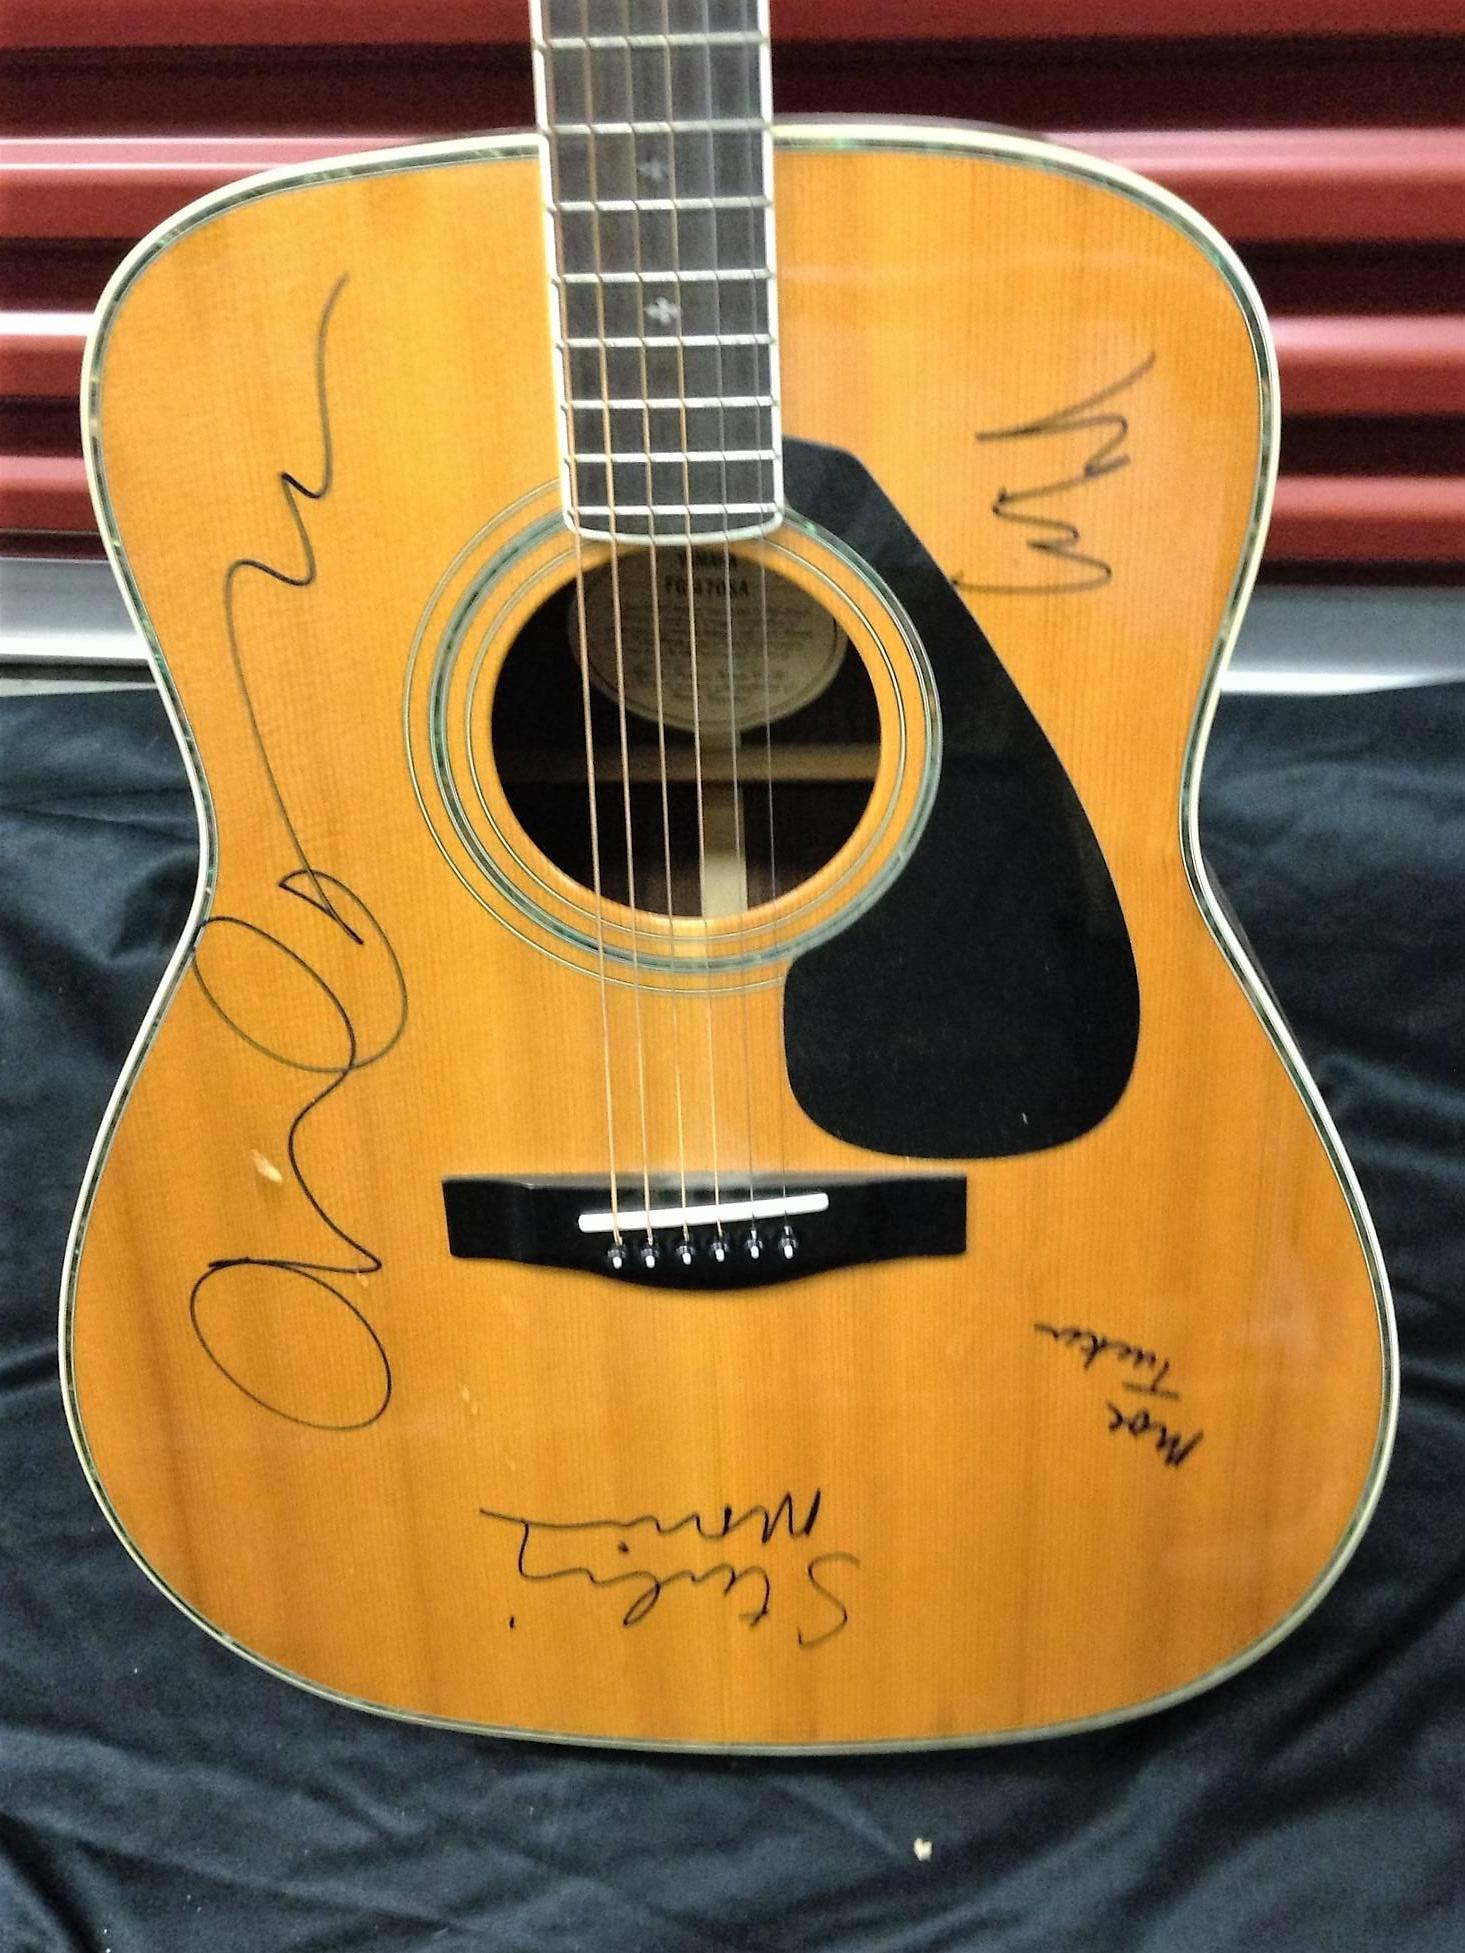 Guitar signed by Lou Reed, Jon Cale, Sterling Morrison and Moe Tucker of the velvet underground. All autographs were obtained in person by the seller in the 1990s. The guitar is a Yamaha model FG-470, made in Taiwan.